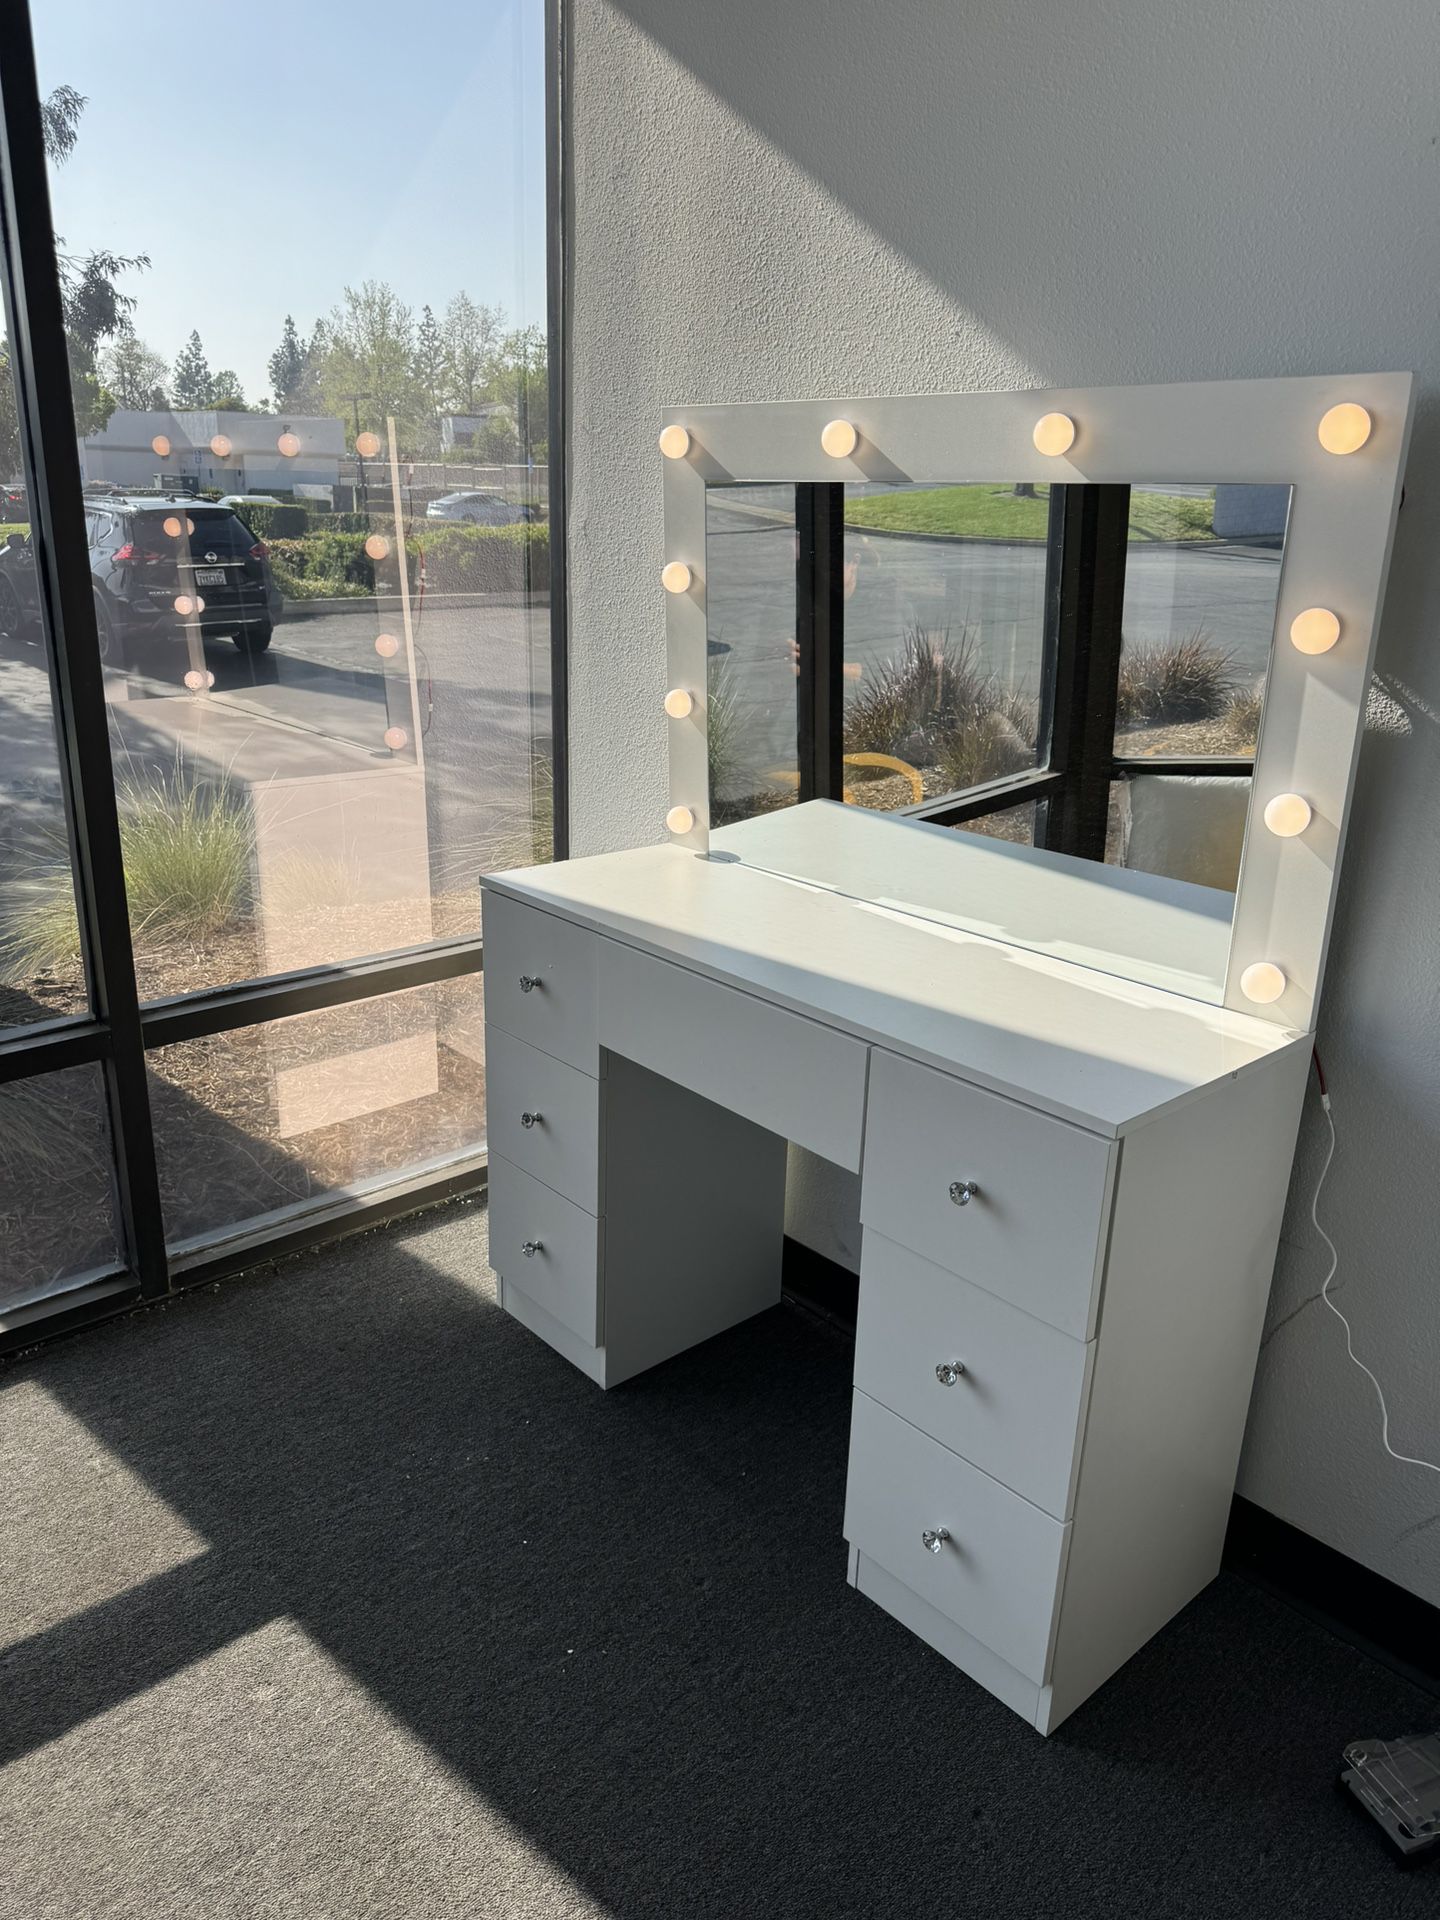 Vanity Table with Mirror Hollywood Light 7 Drawers